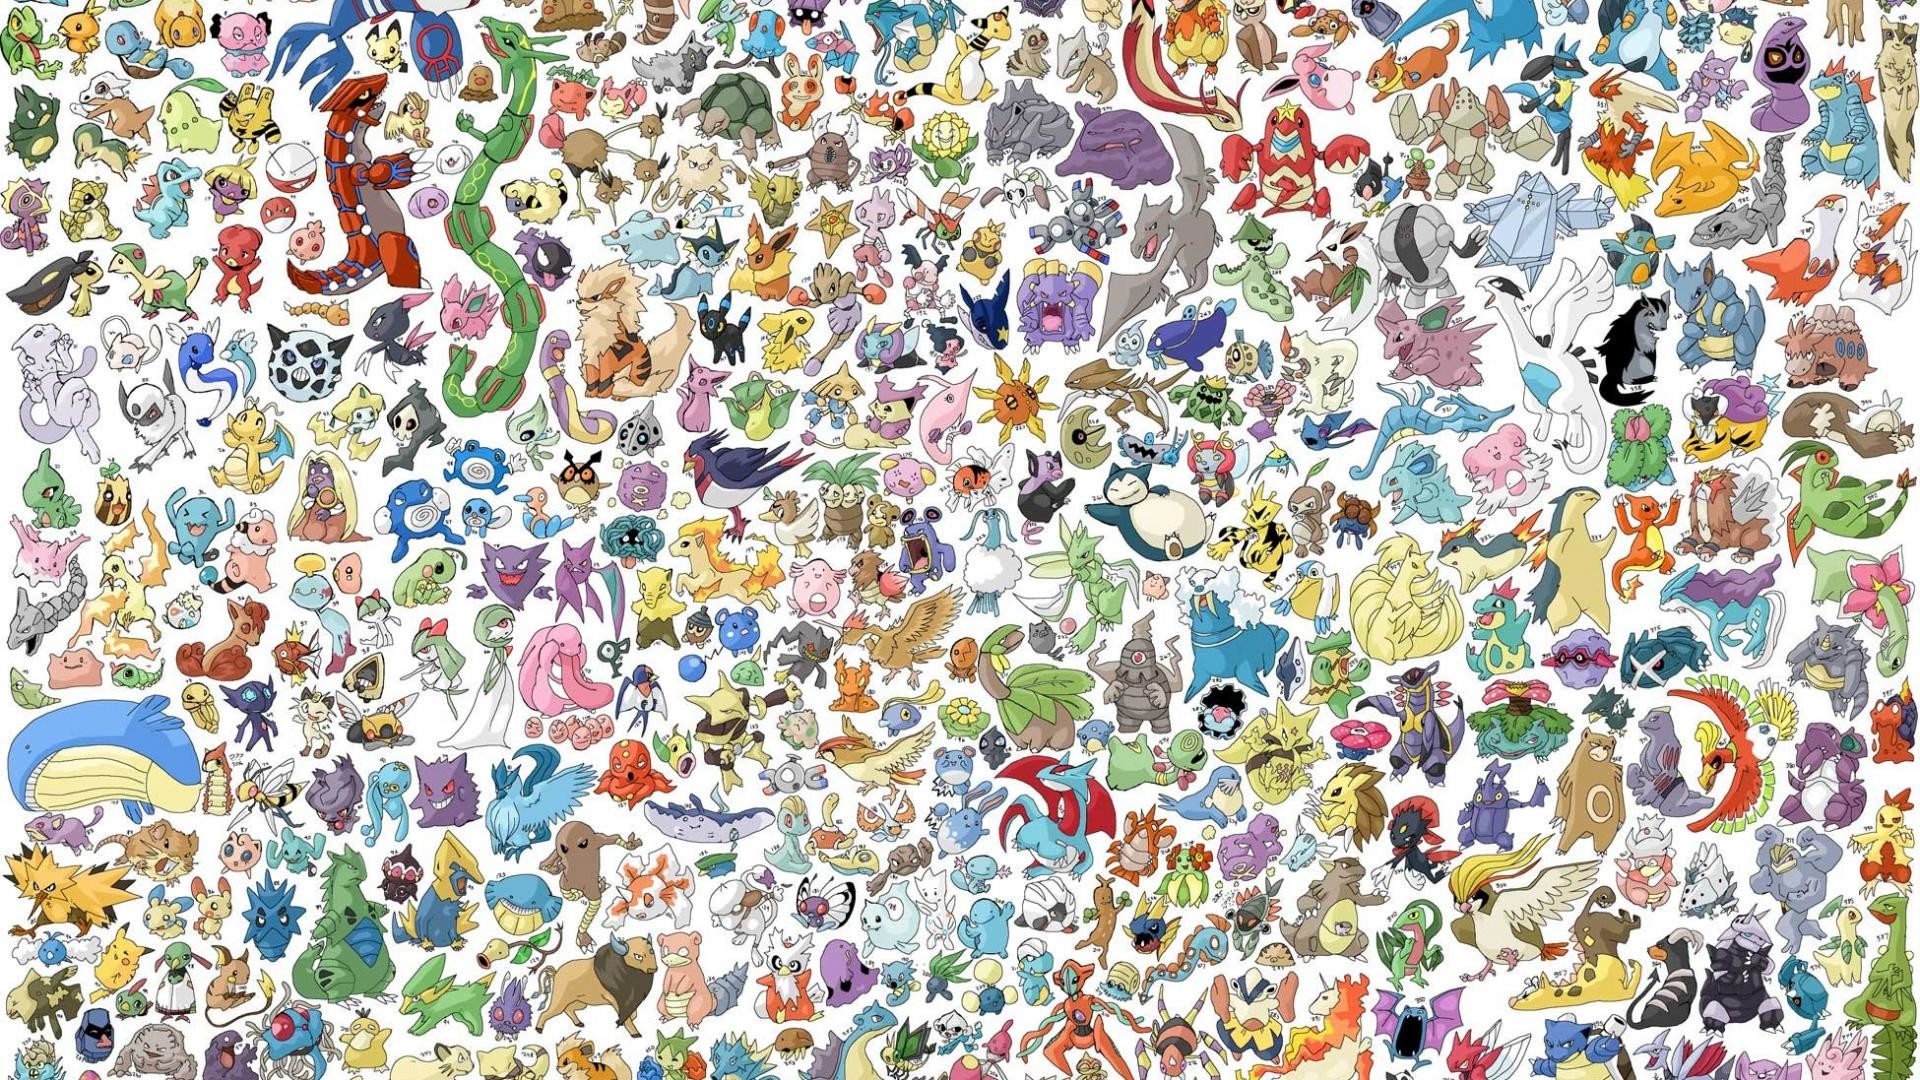 1920x1080  Pokemon wallpapers by request (High Quality)